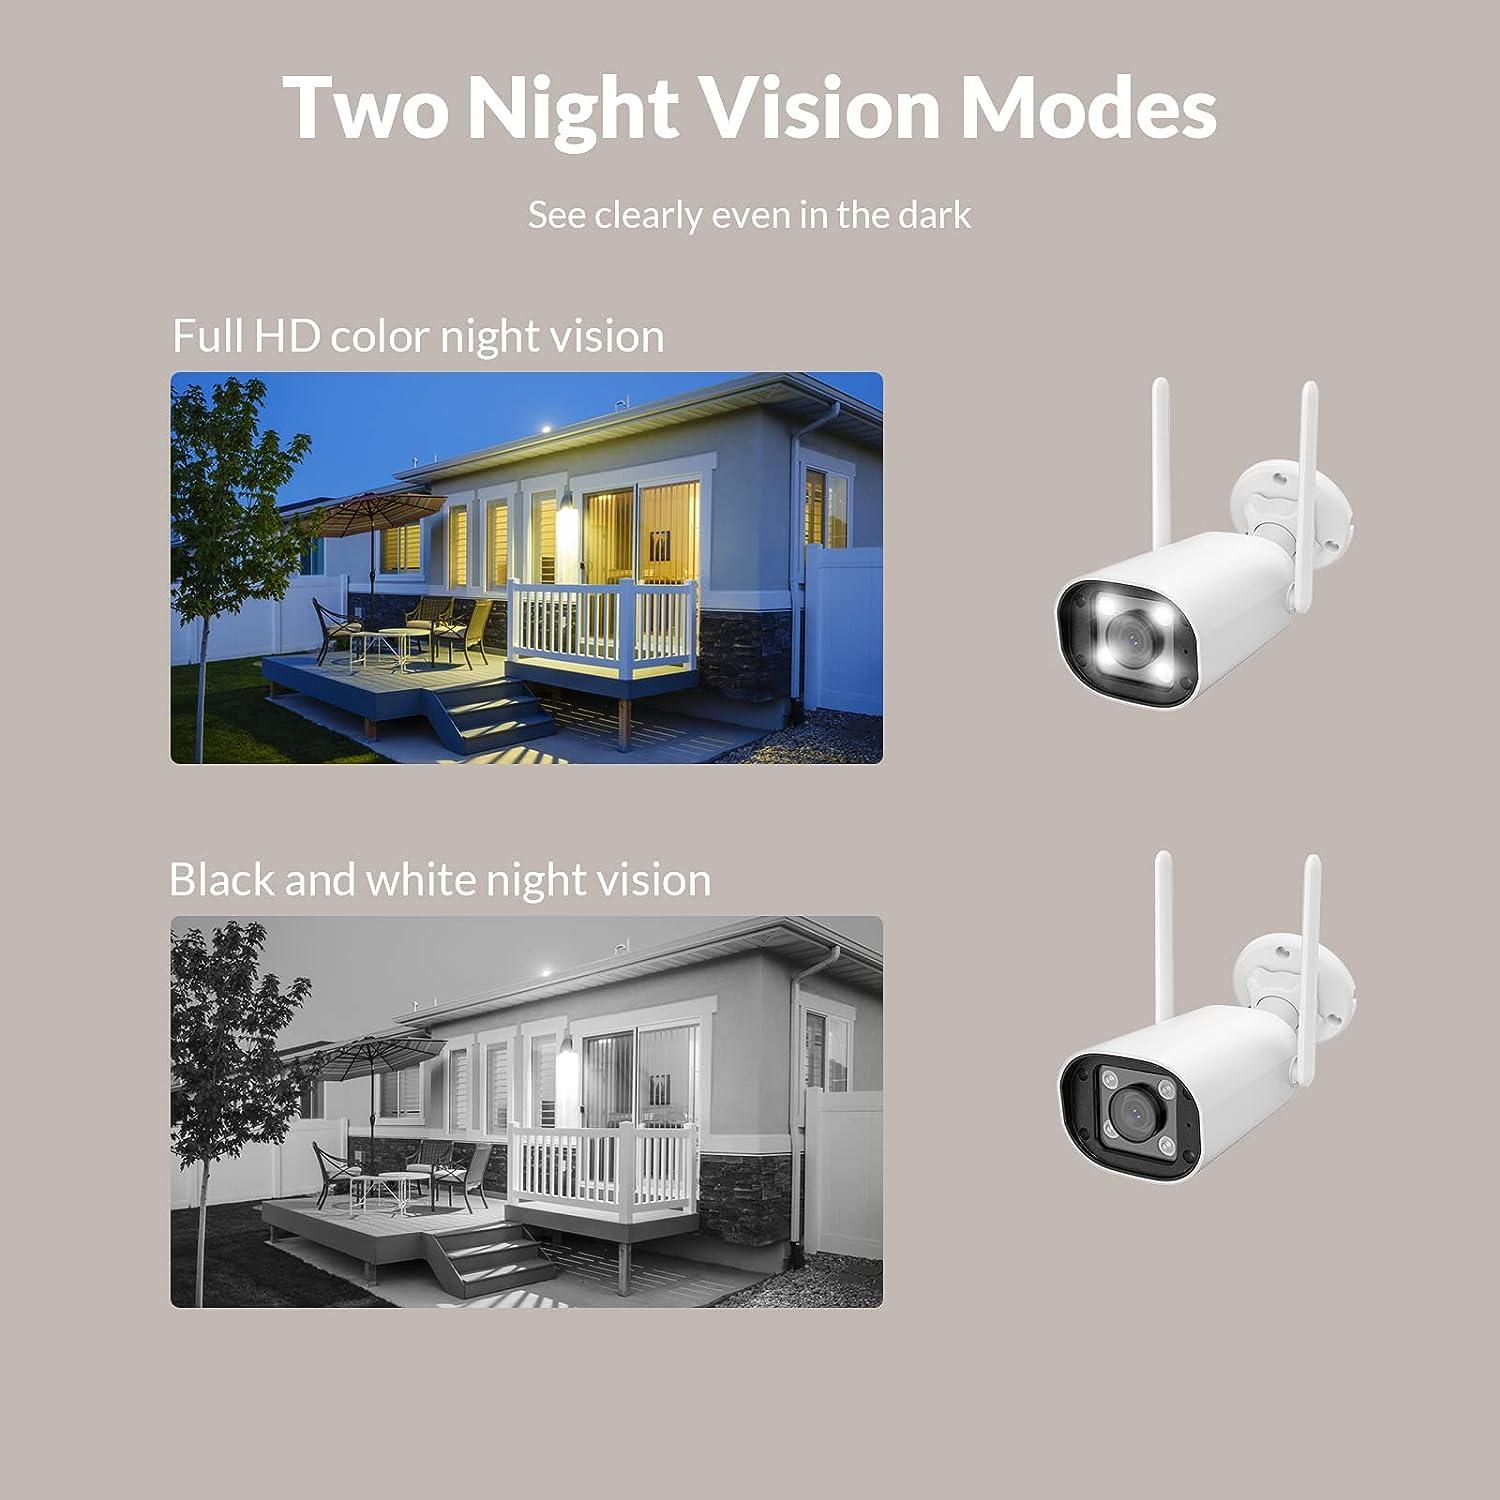 NETVUE Outdoor Security Camera, 1080P 2.4G WiFi Home Video Camera, Color  Night Vision, Motion Detection, Two-Way Audio, Siren Alarm, Spotlight  Camera